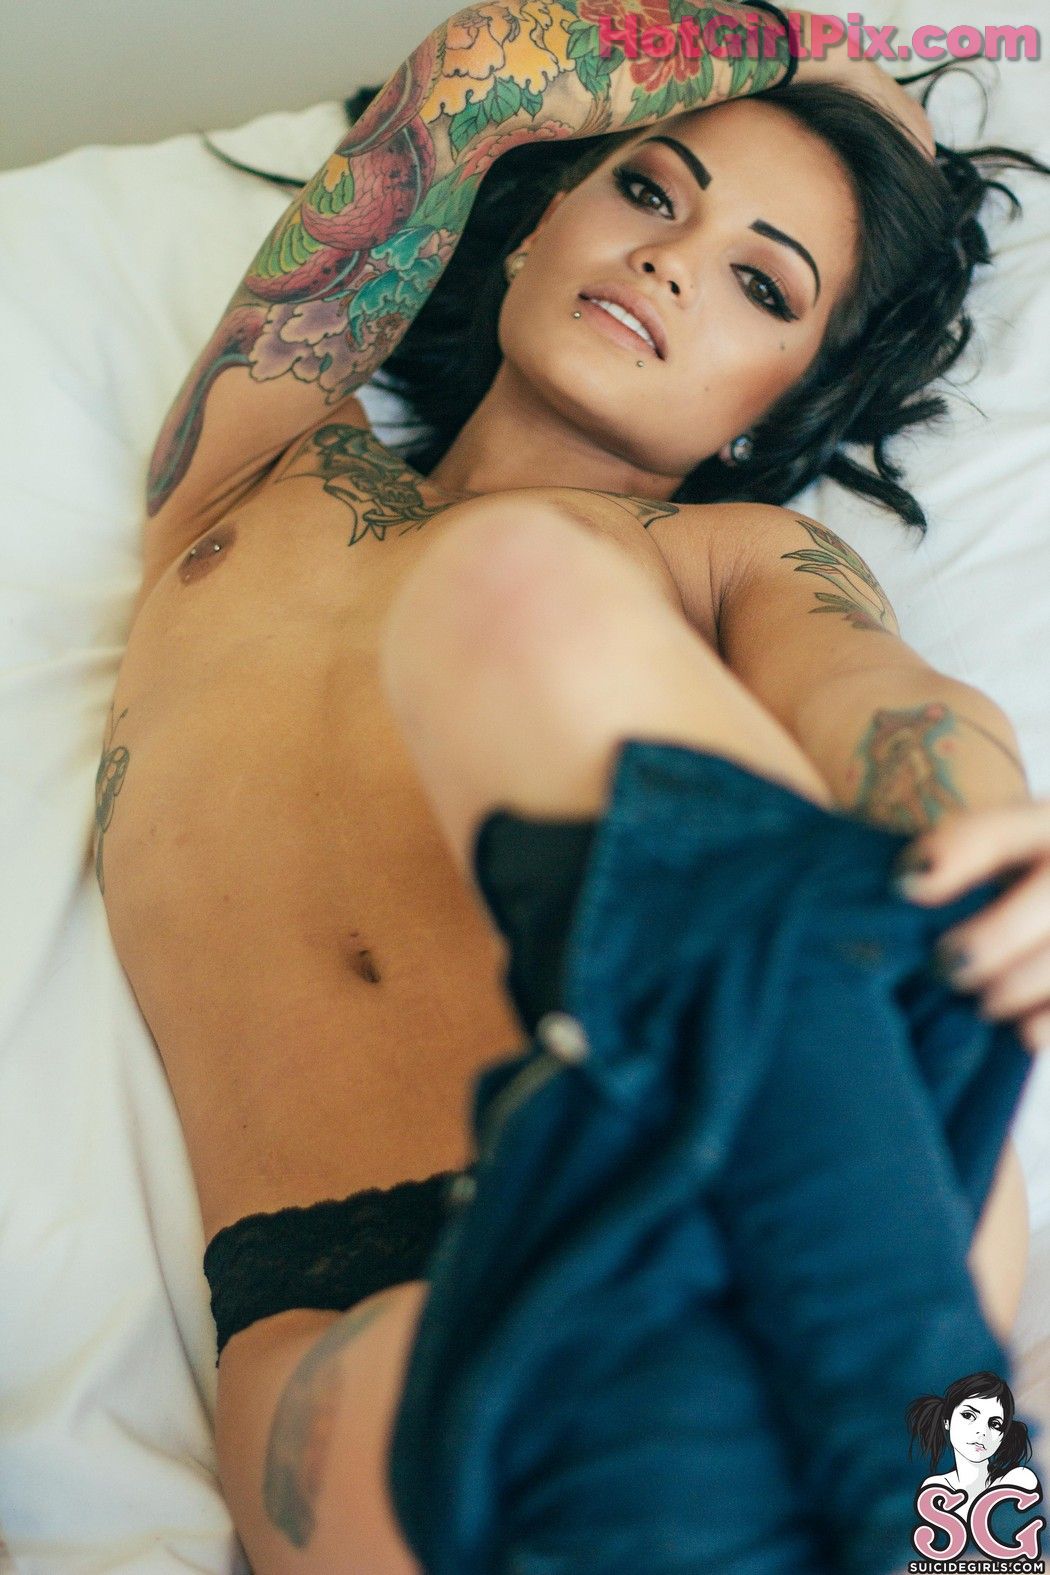 [Suicide Girls] Cadorna - Lazing in London